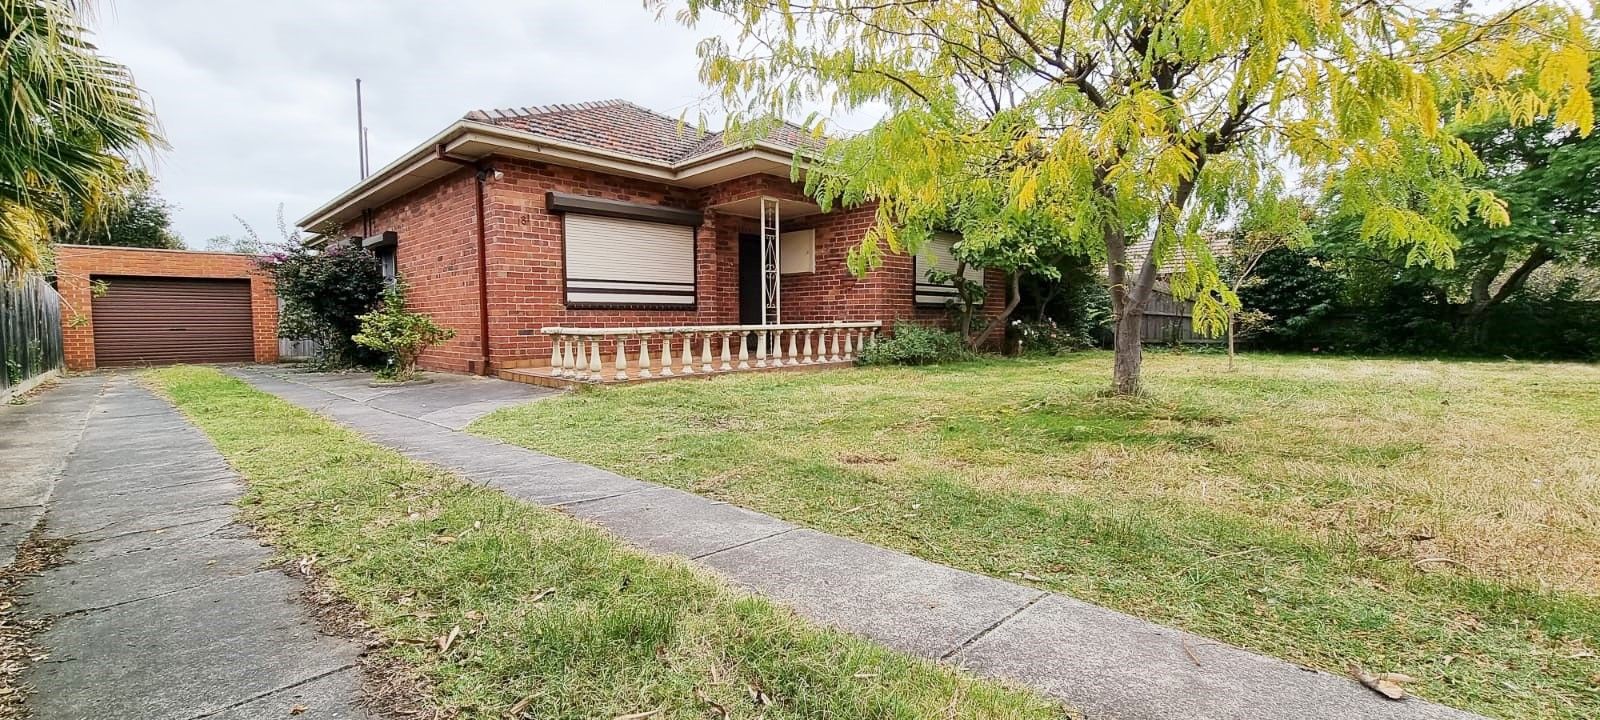 181 Clayton Road, Oakleigh East VIC 3166, Image 0